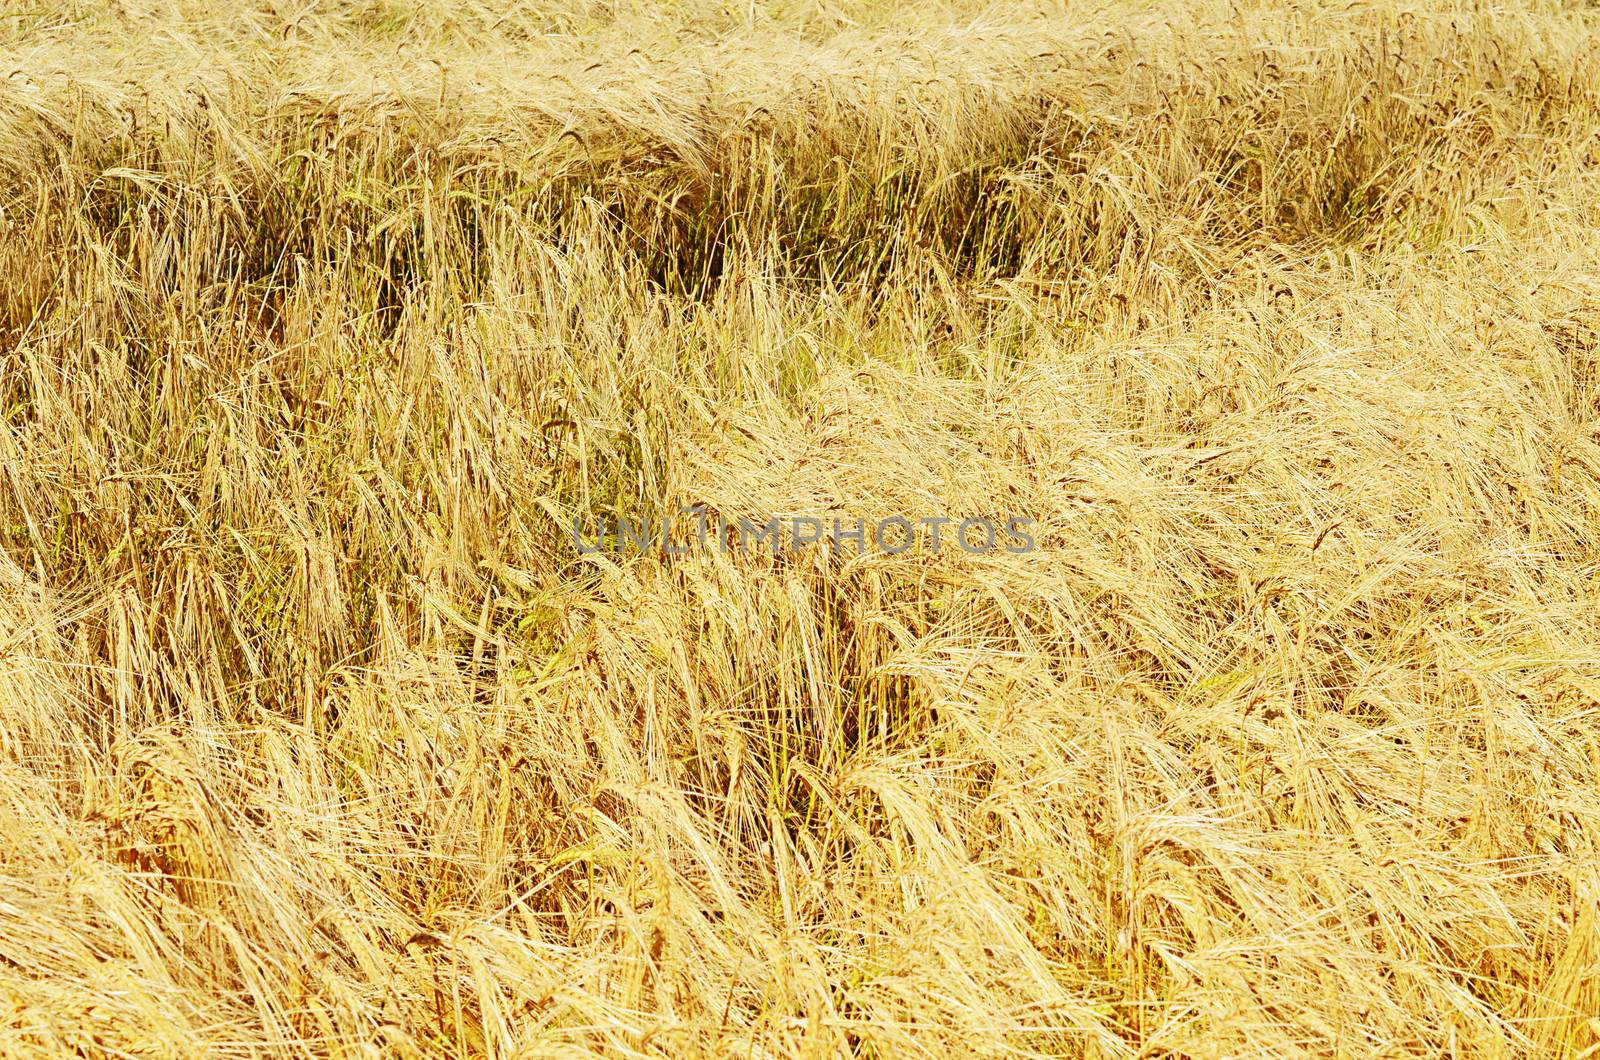 Field with ripe rye in the fall